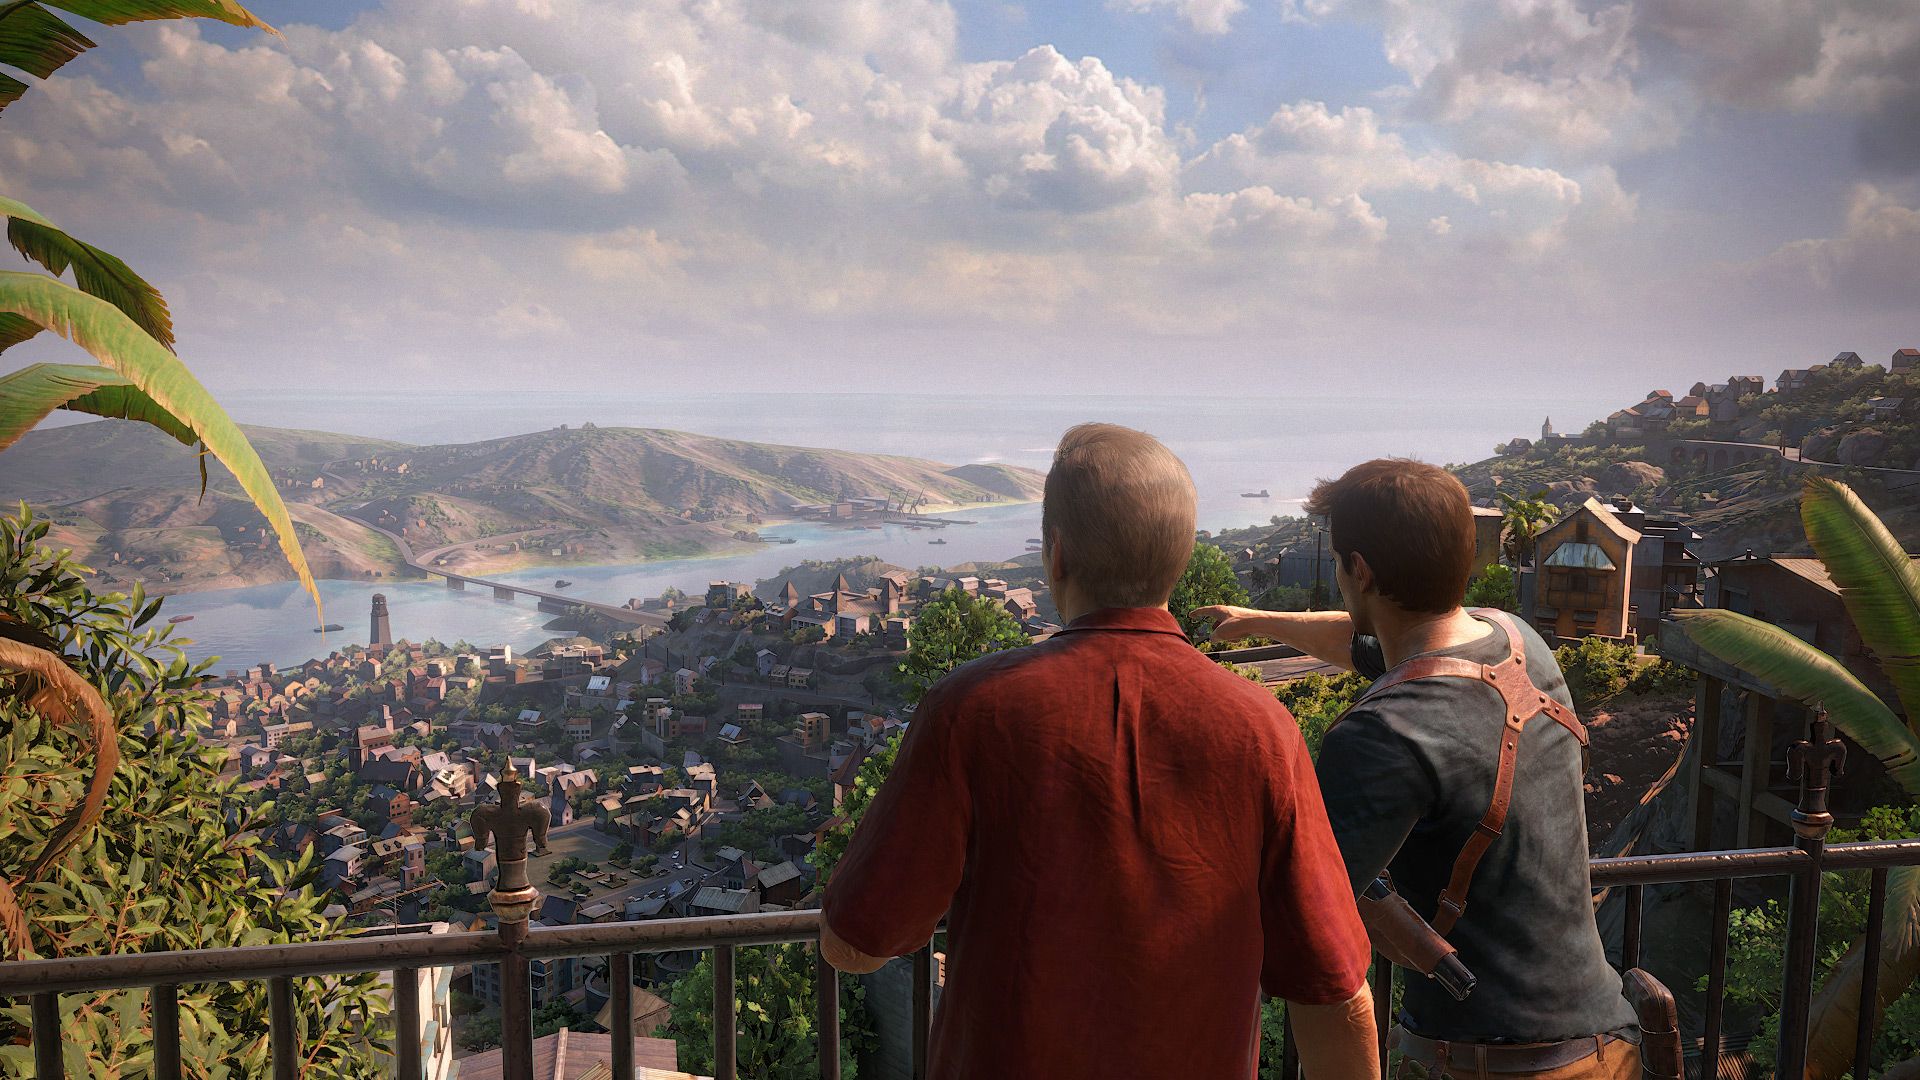 Sony seemingly reveals Uncharted 4 is coming to PC in an investor